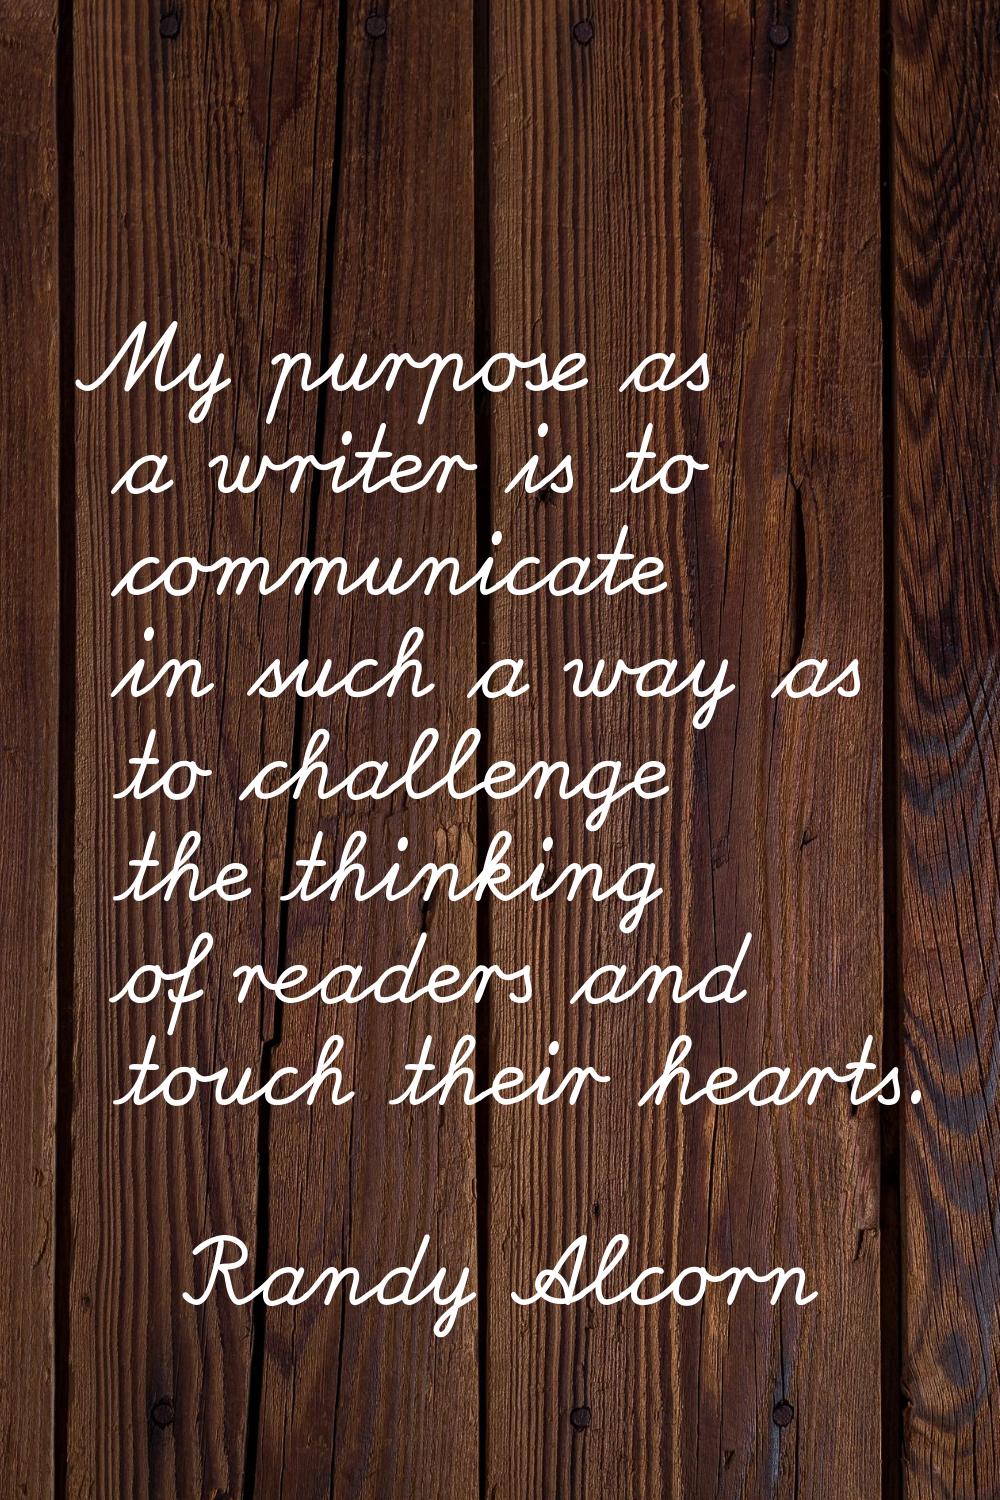 My purpose as a writer is to communicate in such a way as to challenge the thinking of readers and 